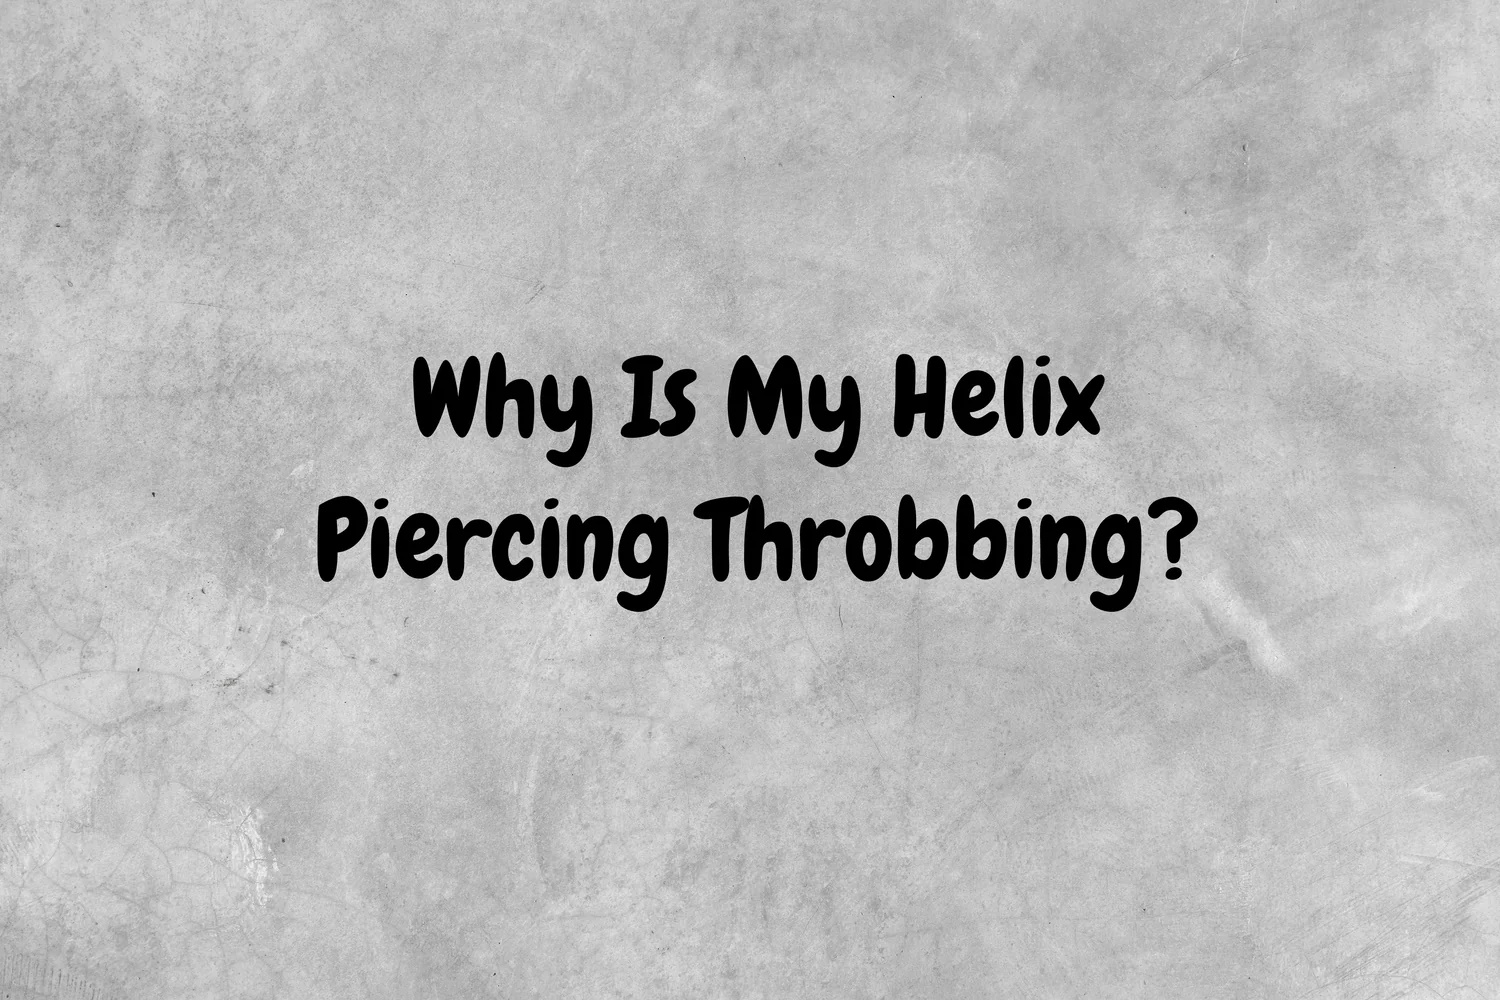 An image with a gray background with black text asking the question, "Why is my helix piercing throbbing?"